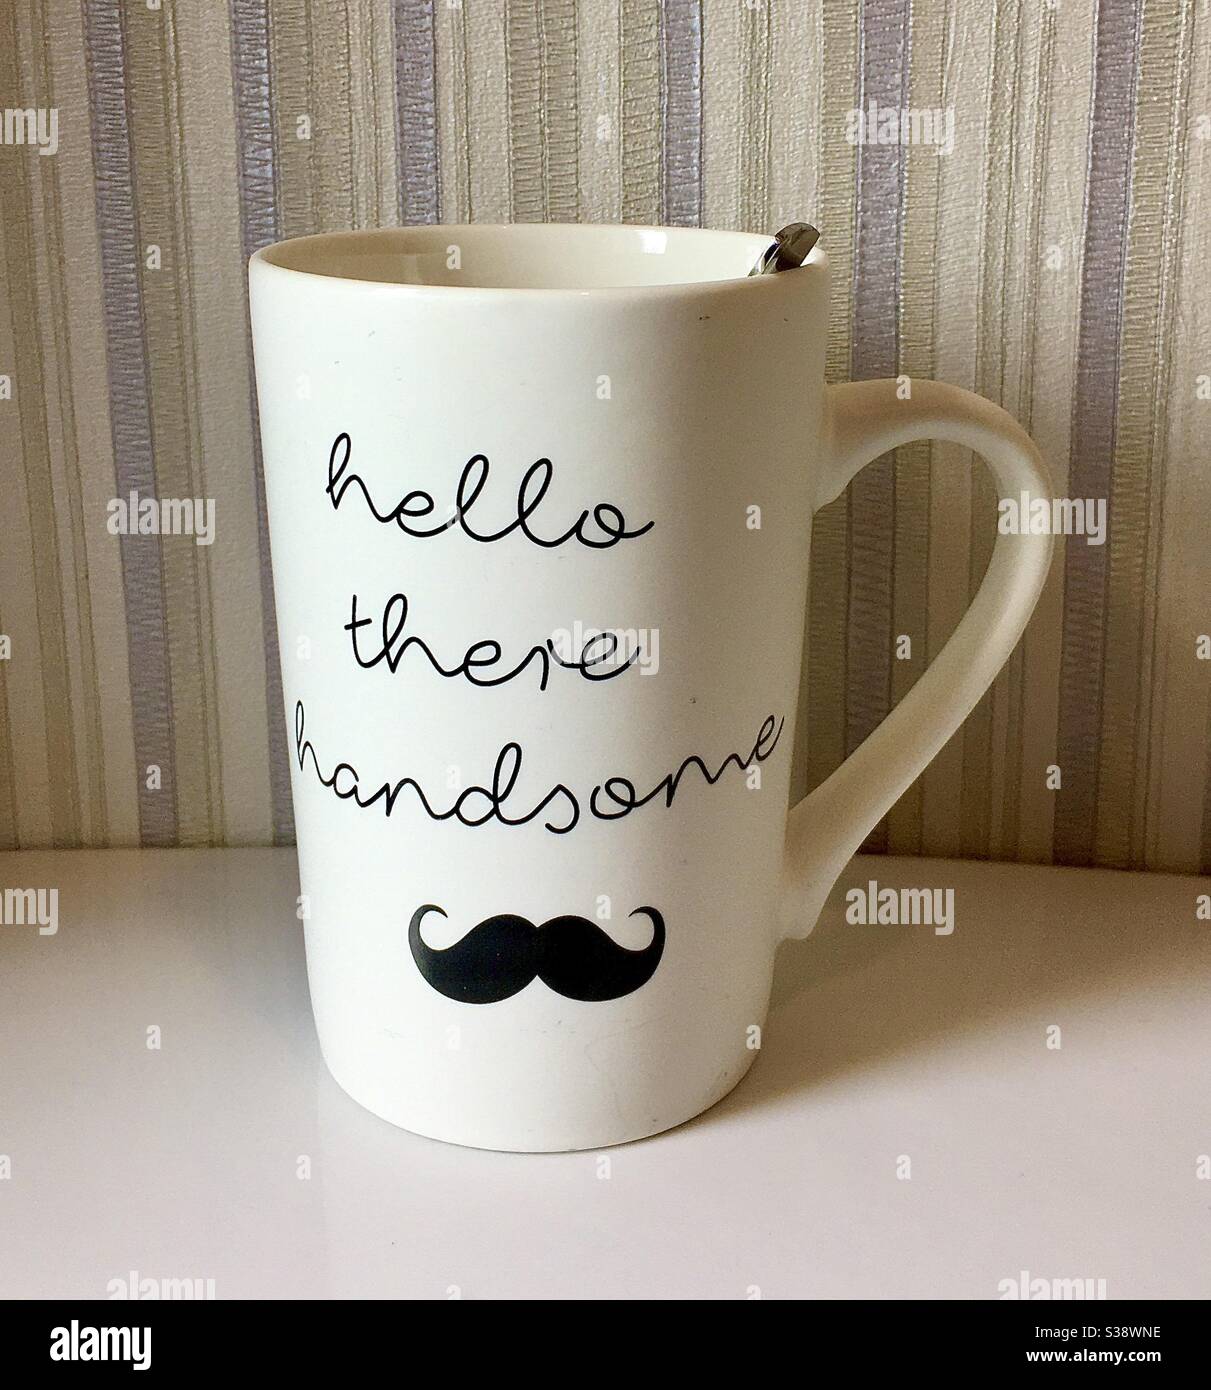 Modern, tall white mug with flattering greeting on the side, together with a picture of a black curly moustache below. Photographed against a vertically-striped wallpaper. Stock Photo